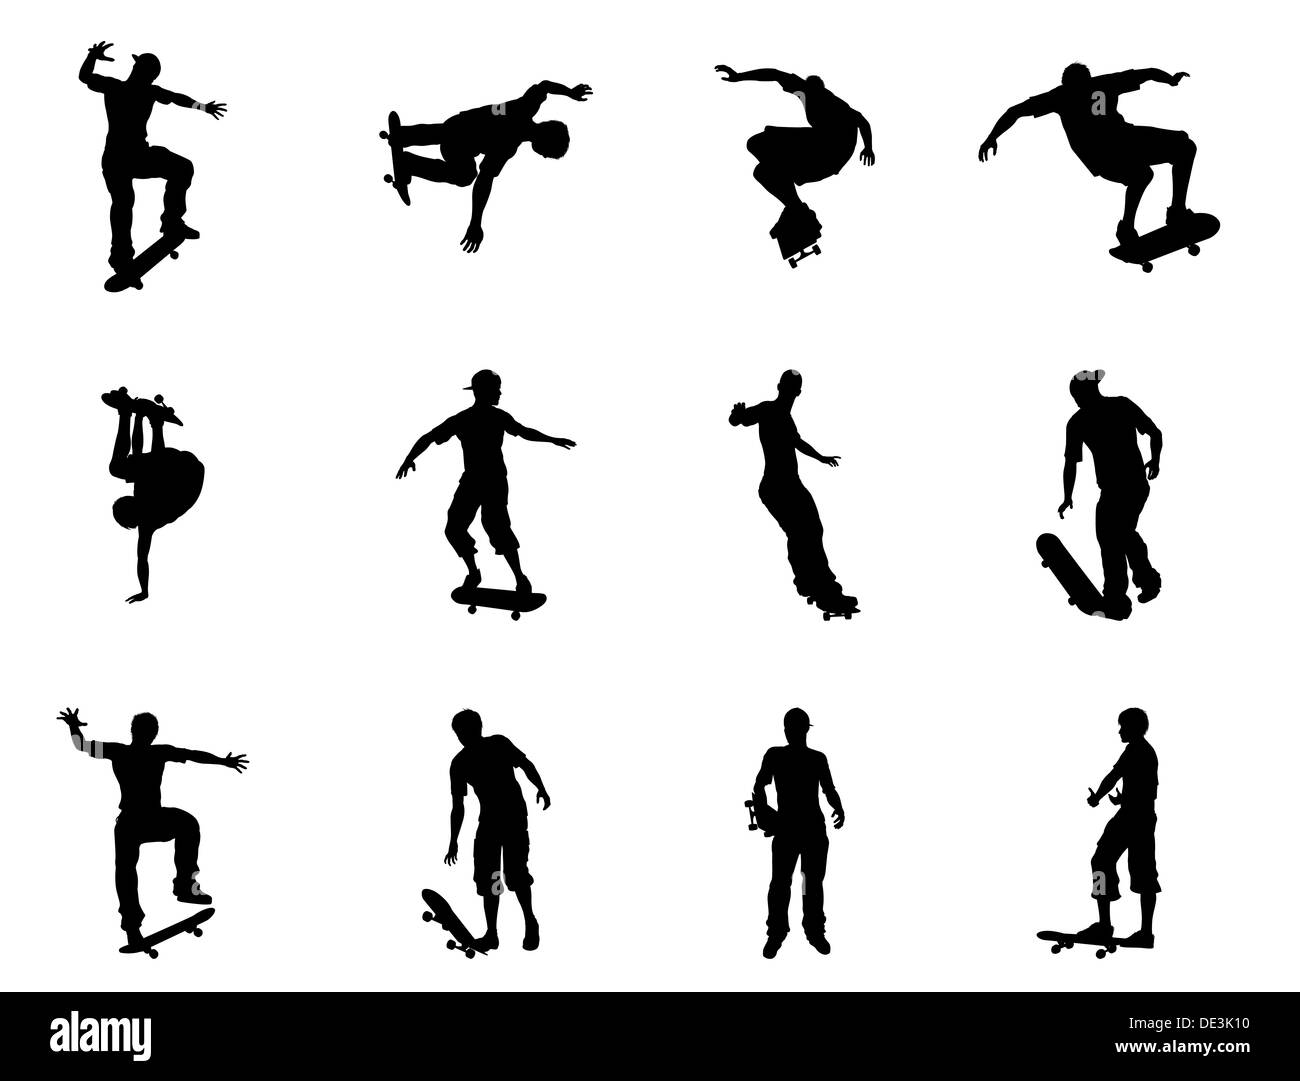 Skating skateboarder silhouette outlines. Skateboarders performing lots of tricks on their boards Stock Photo